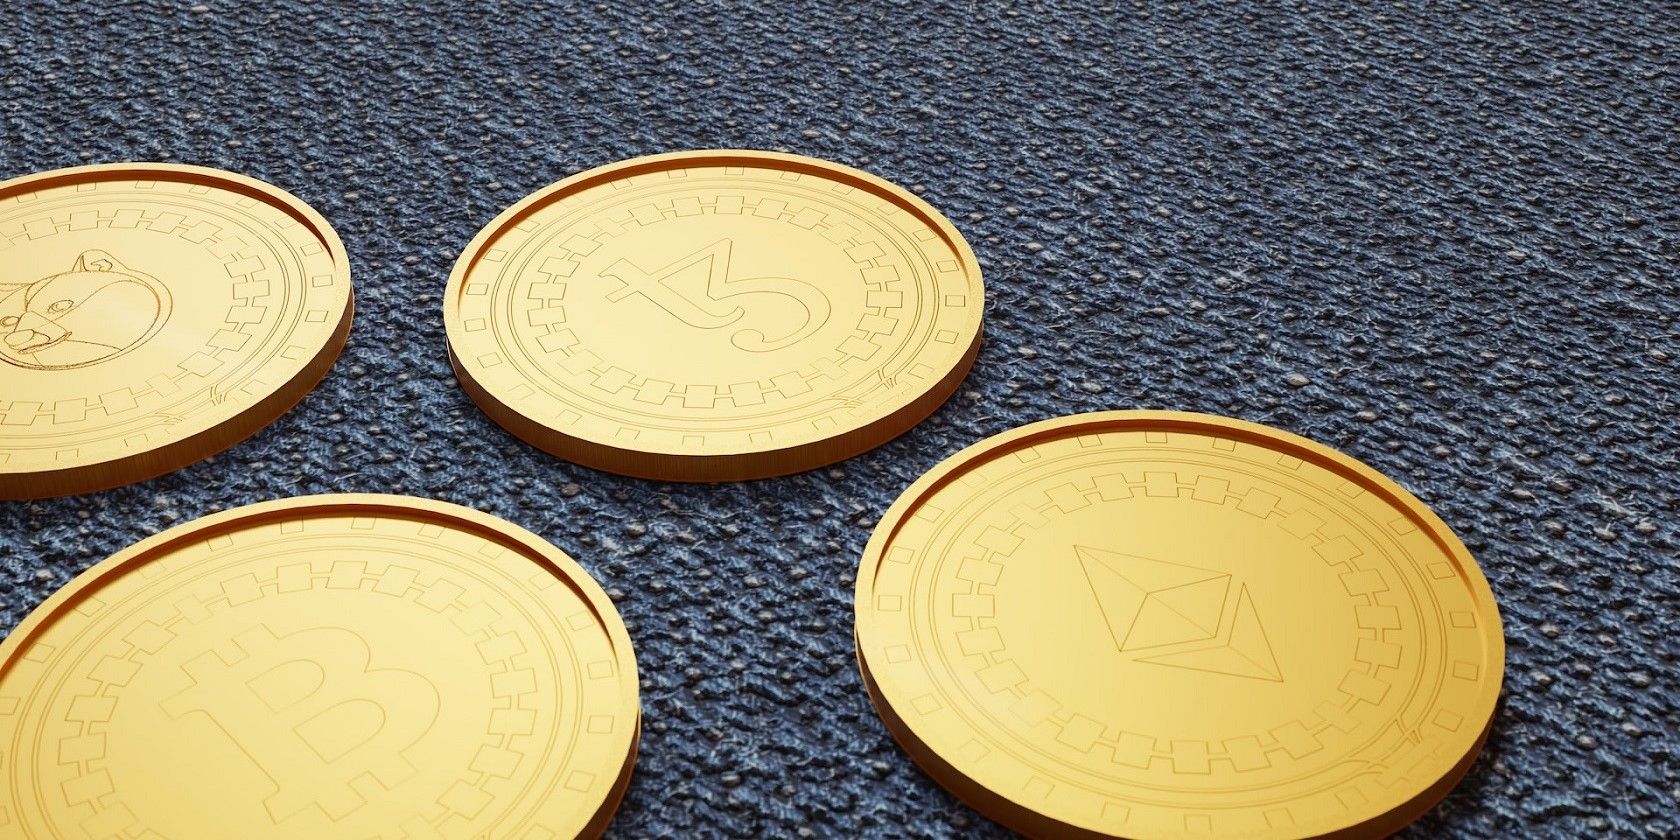 3D illustration of tezos coin, bitcoin, dogecoin, and ethereum